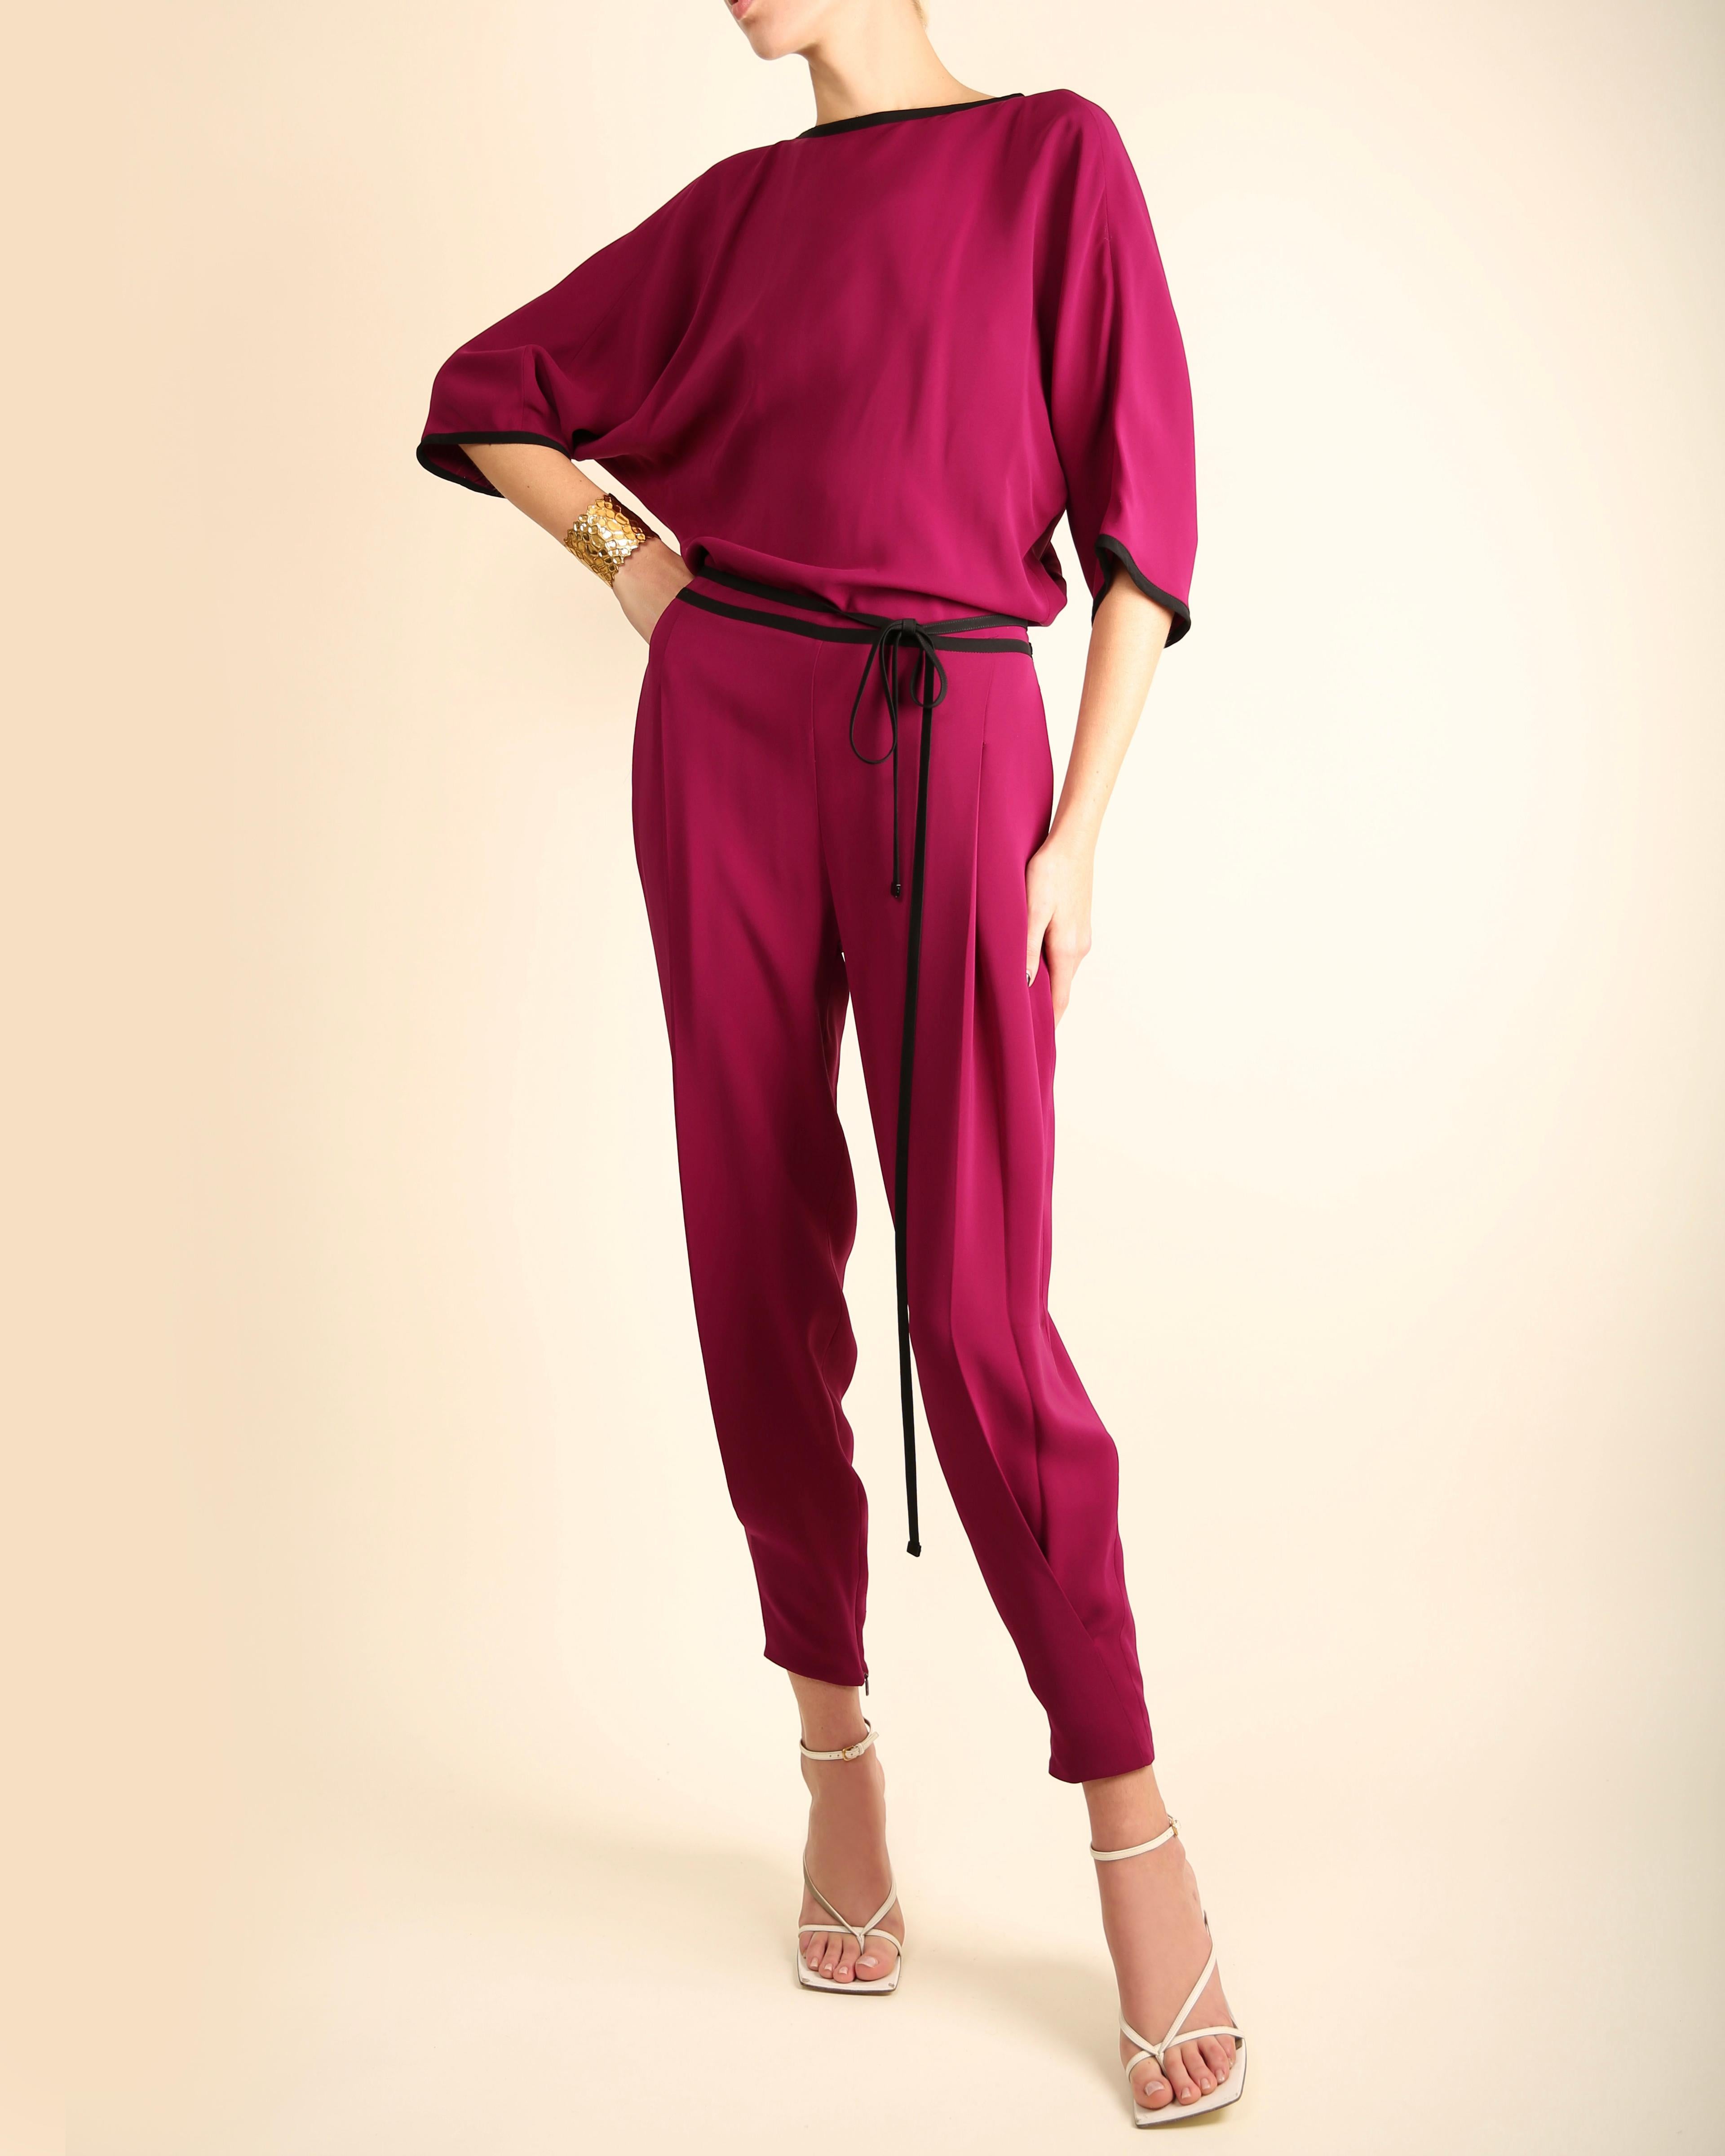 Gucci S/S 2014 silk magenta black backless dolman tapered pant jumpsuit  For Sale 1